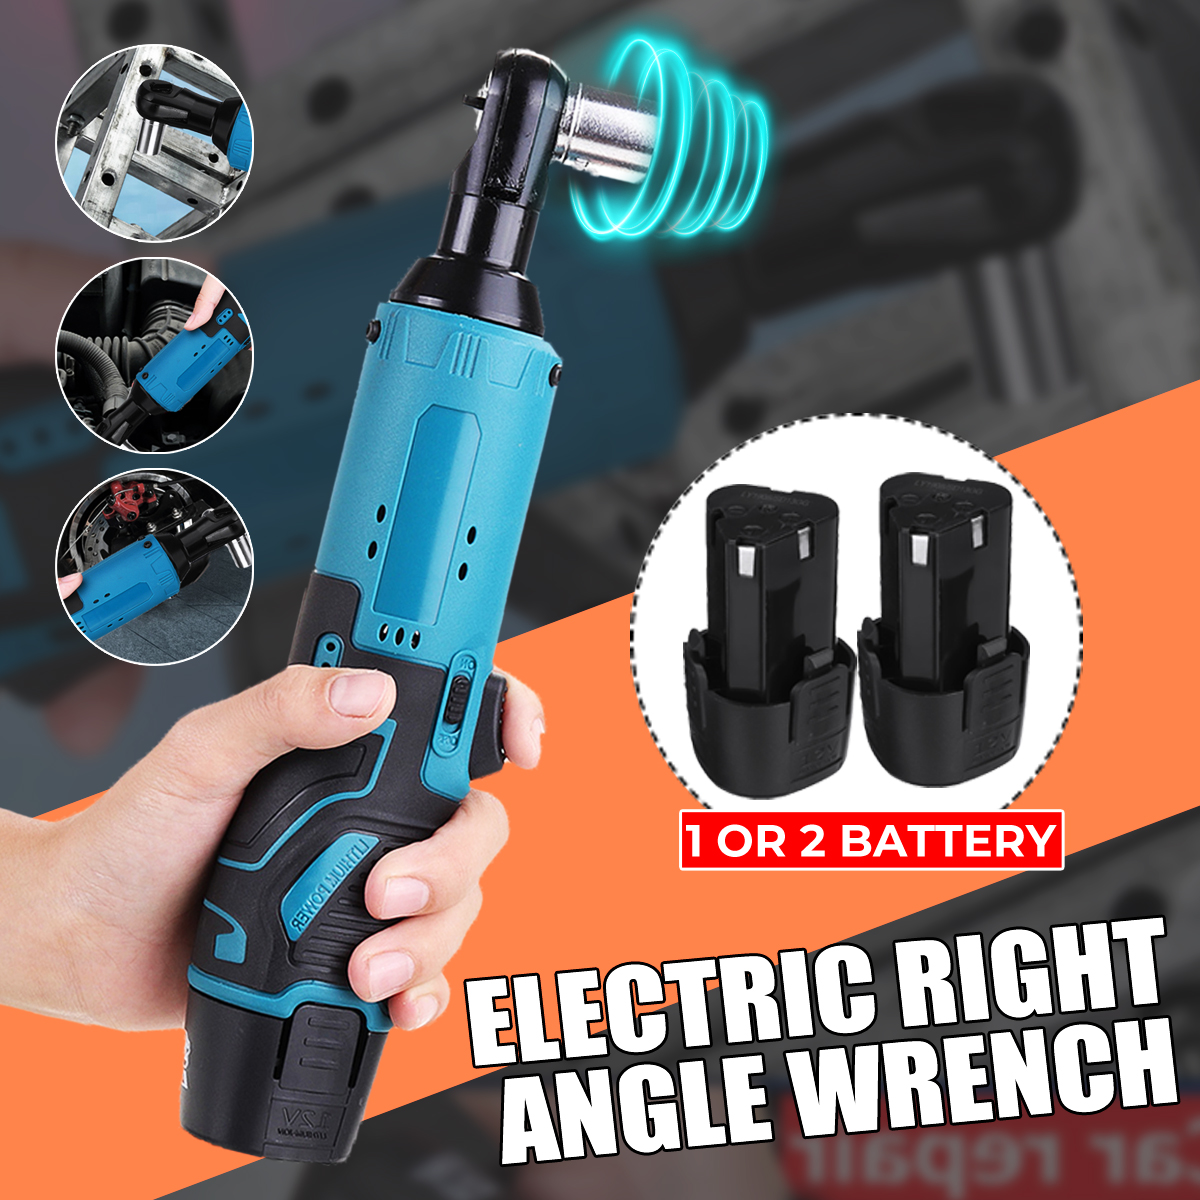 12V-Right-Angle-Wrench-LED-1500mAh-Rechargeable-Ratchet-Wrench-Car-Repair-Tool-W-12pcs-Battery-1765715-2